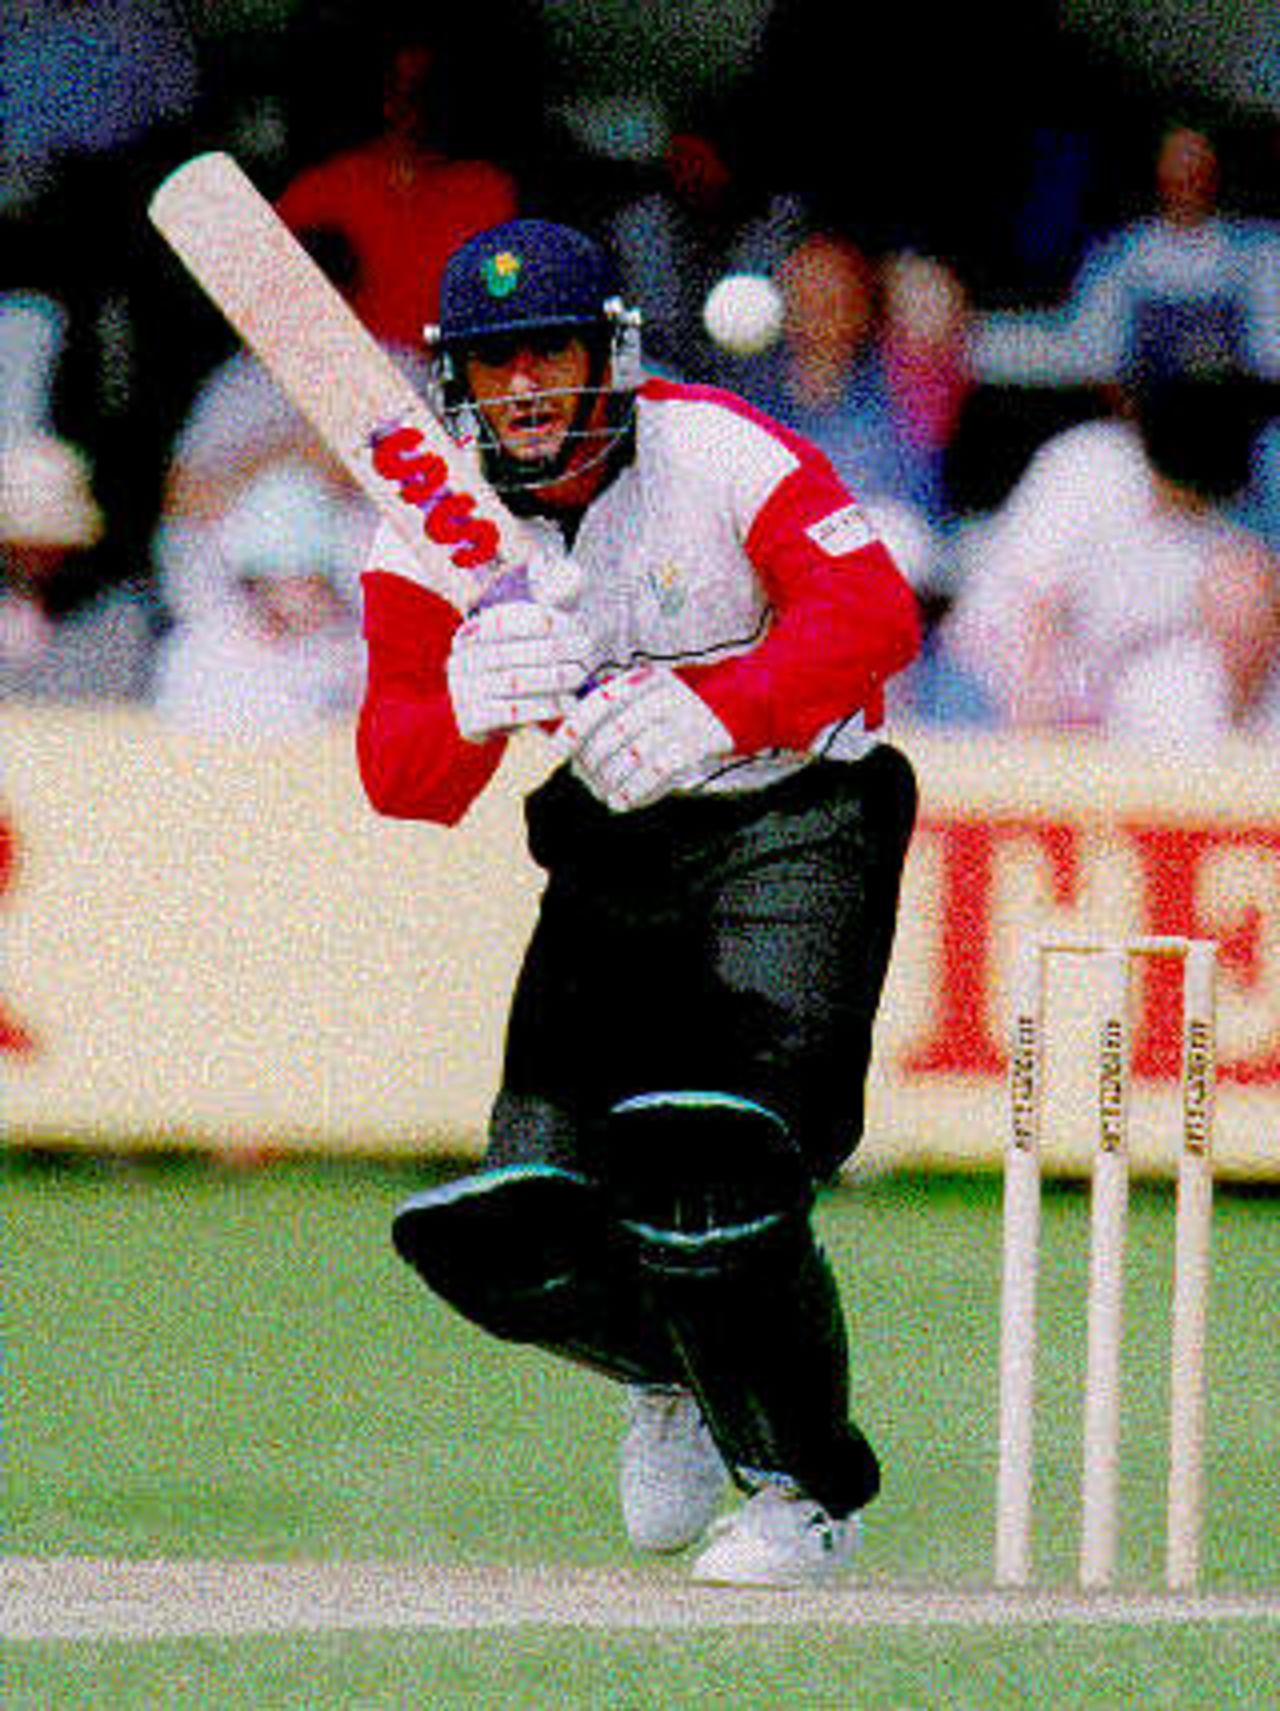 Steve James on drives against Surrey in the Sunday League fixture with Yorkshire at Cardiff in 1996